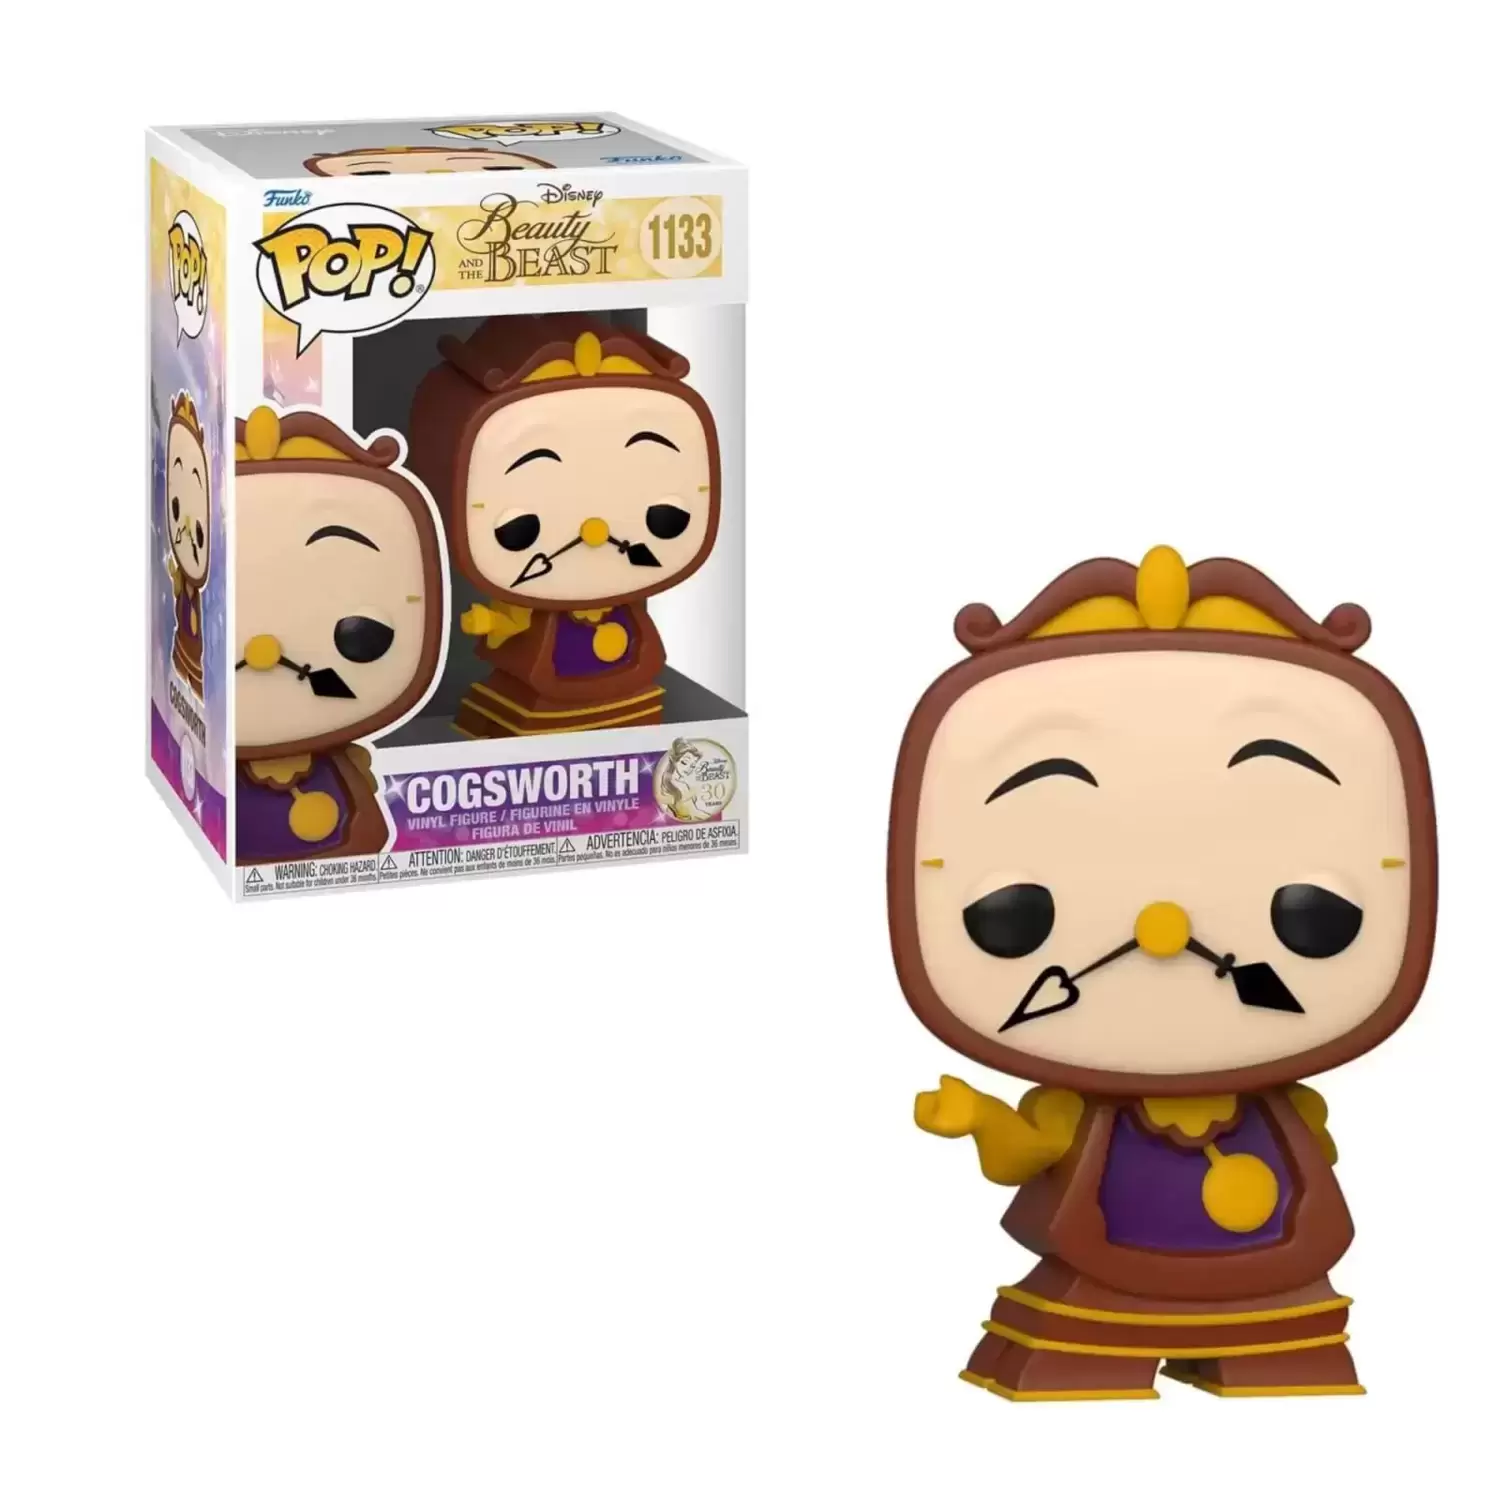 POP! Disney - The Beauty And The Beast - Cogsworth